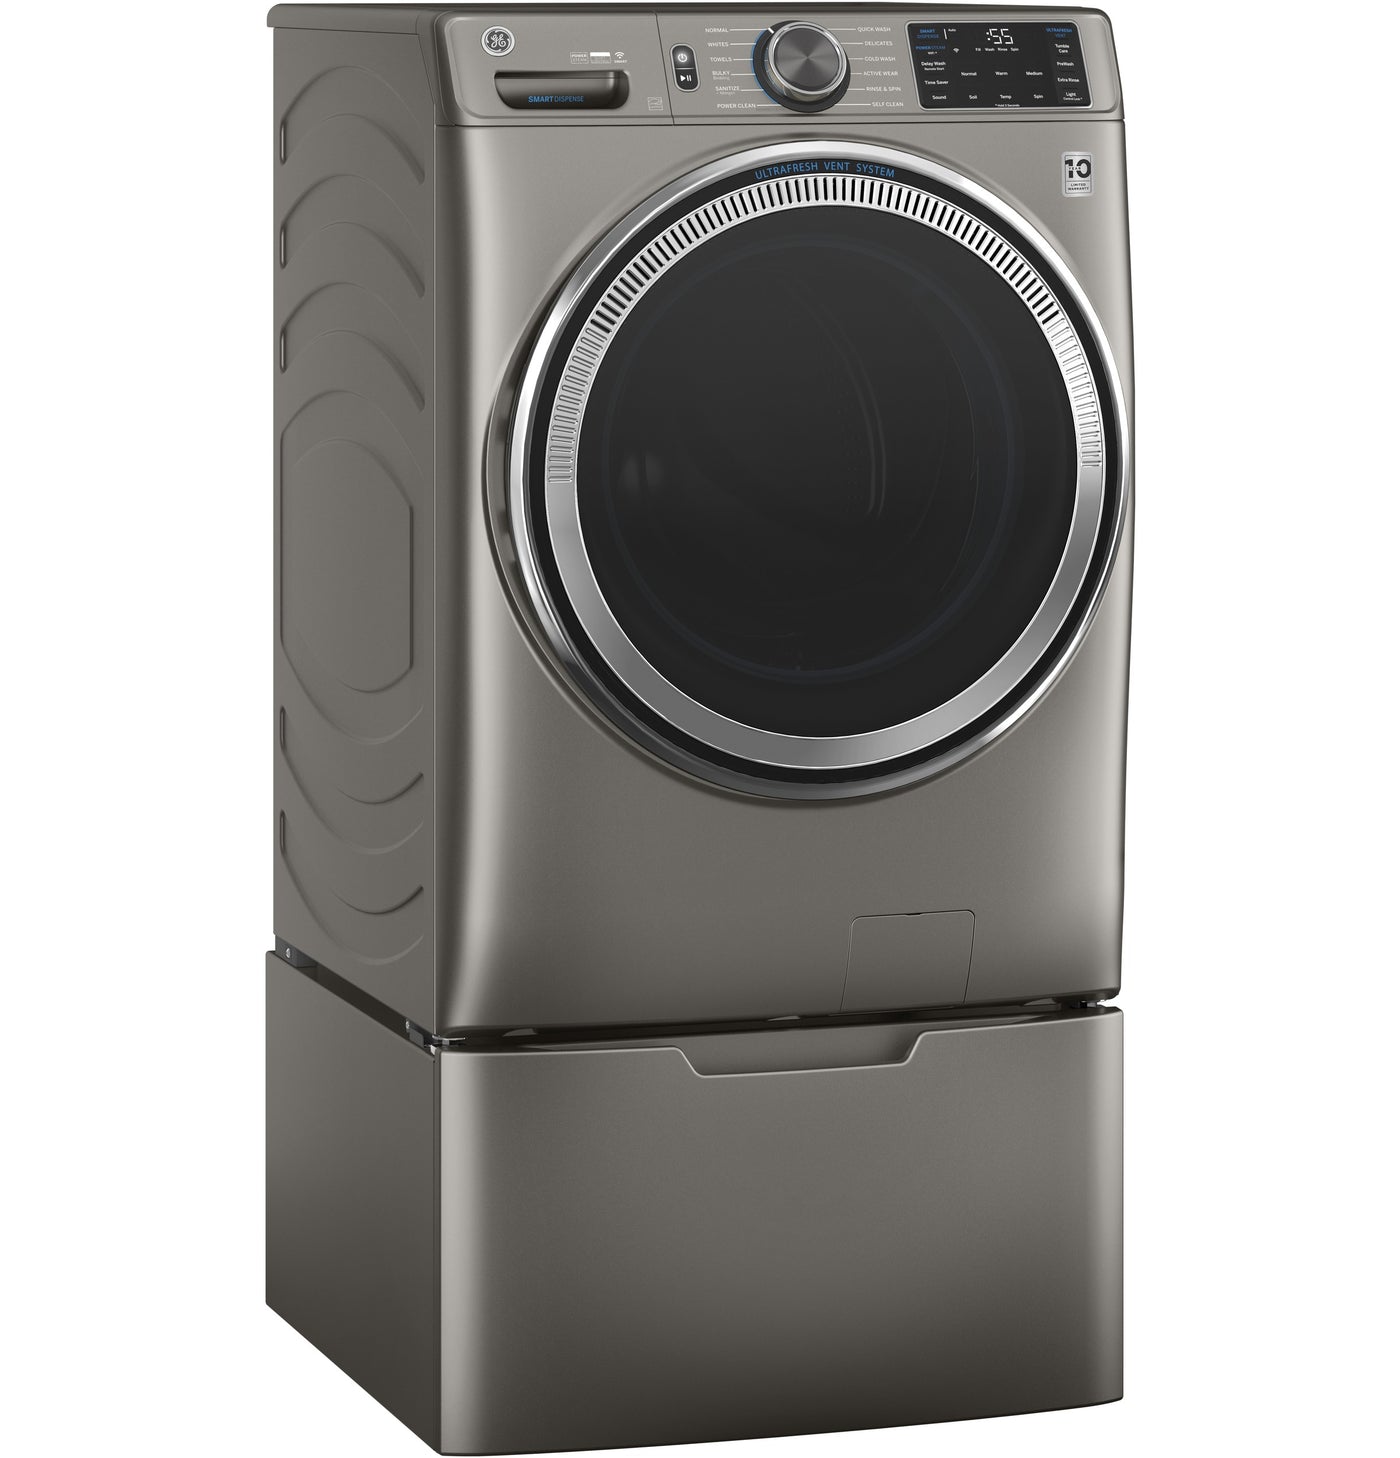 GE Satin Nickel Front Load Washer (5.5 Cu. Ft.) - GFW650SPNSN